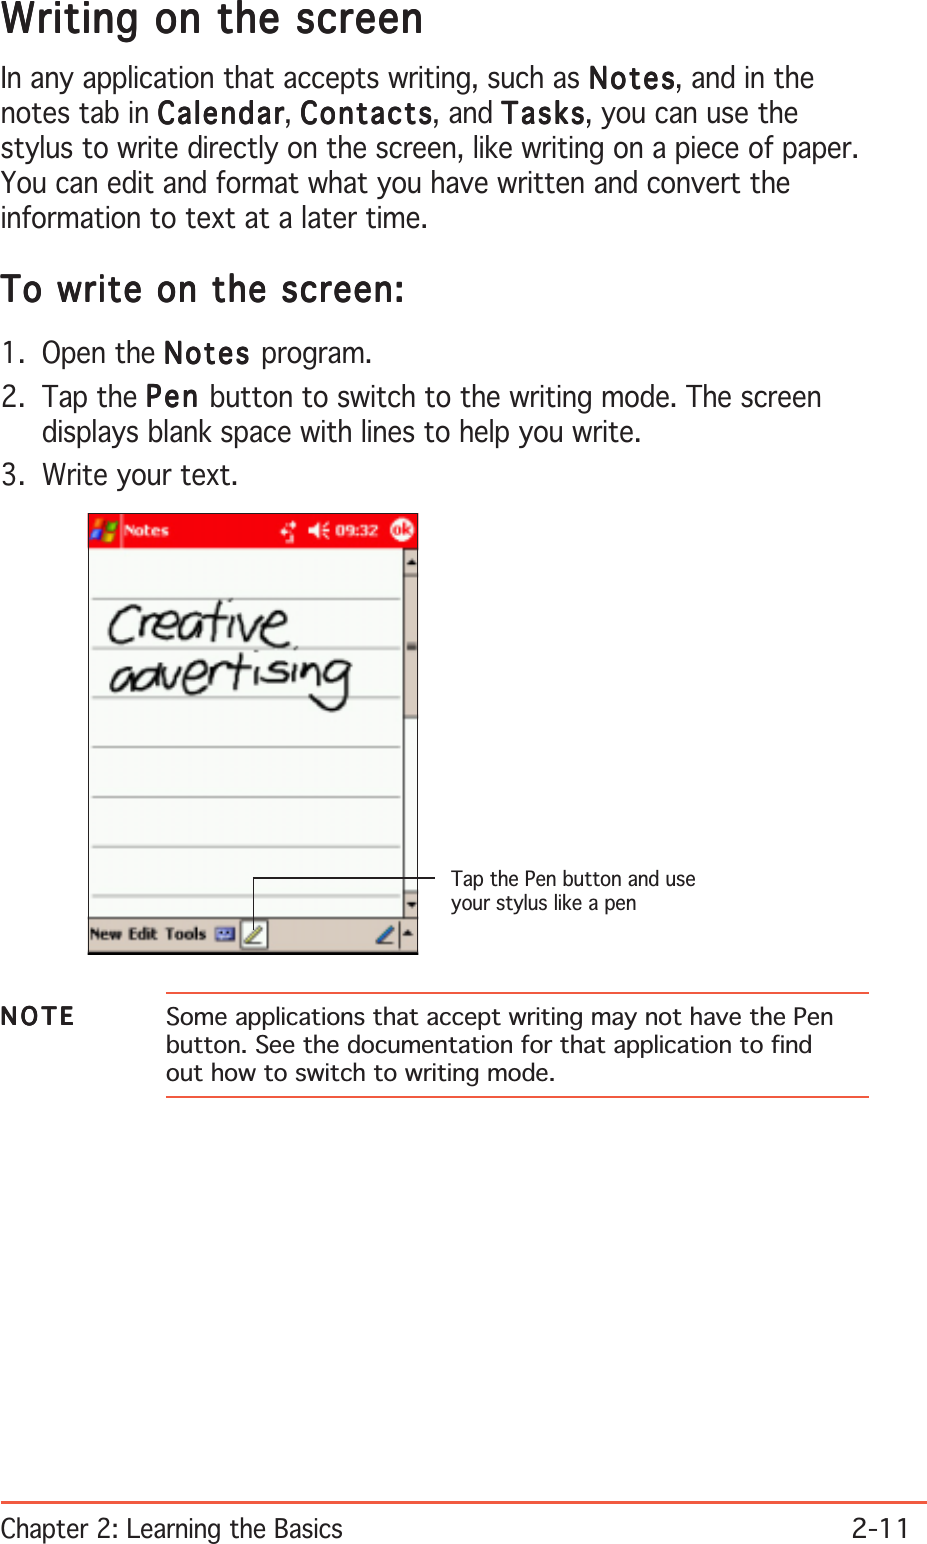 Chapter 2: Learning the Basics2-11Writing on the screenWriting on the screenWriting on the screenWriting on the screenWriting on the screenIn any application that accepts writing, such as NotesNotesNotesNotesNotes, and in thenotes tab in CalendarCalendarCalendarCalendarCalendar, ContactsContactsContactsContactsContacts, and TasksTasksTasksTasksTa sks, you can use thestylus to write directly on the screen, like writing on a piece of paper.You can edit and format what you have written and convert theinformation to text at a later time.To write on the screen:To write on the screen:To write on the screen:To write on the screen:To write on the screen:1. Open the NotesNotesNotesNotesNot es program.2. Tap the PenPenPenPenPen button to switch to the writing mode. The screendisplays blank space with lines to help you write.3. Write your text.NOTENOTENOTENOTEN O T E Some applications that accept writing may not have the Penbutton. See the documentation for that application to findout how to switch to writing mode.Tap the Pen button and useyour stylus like a pen